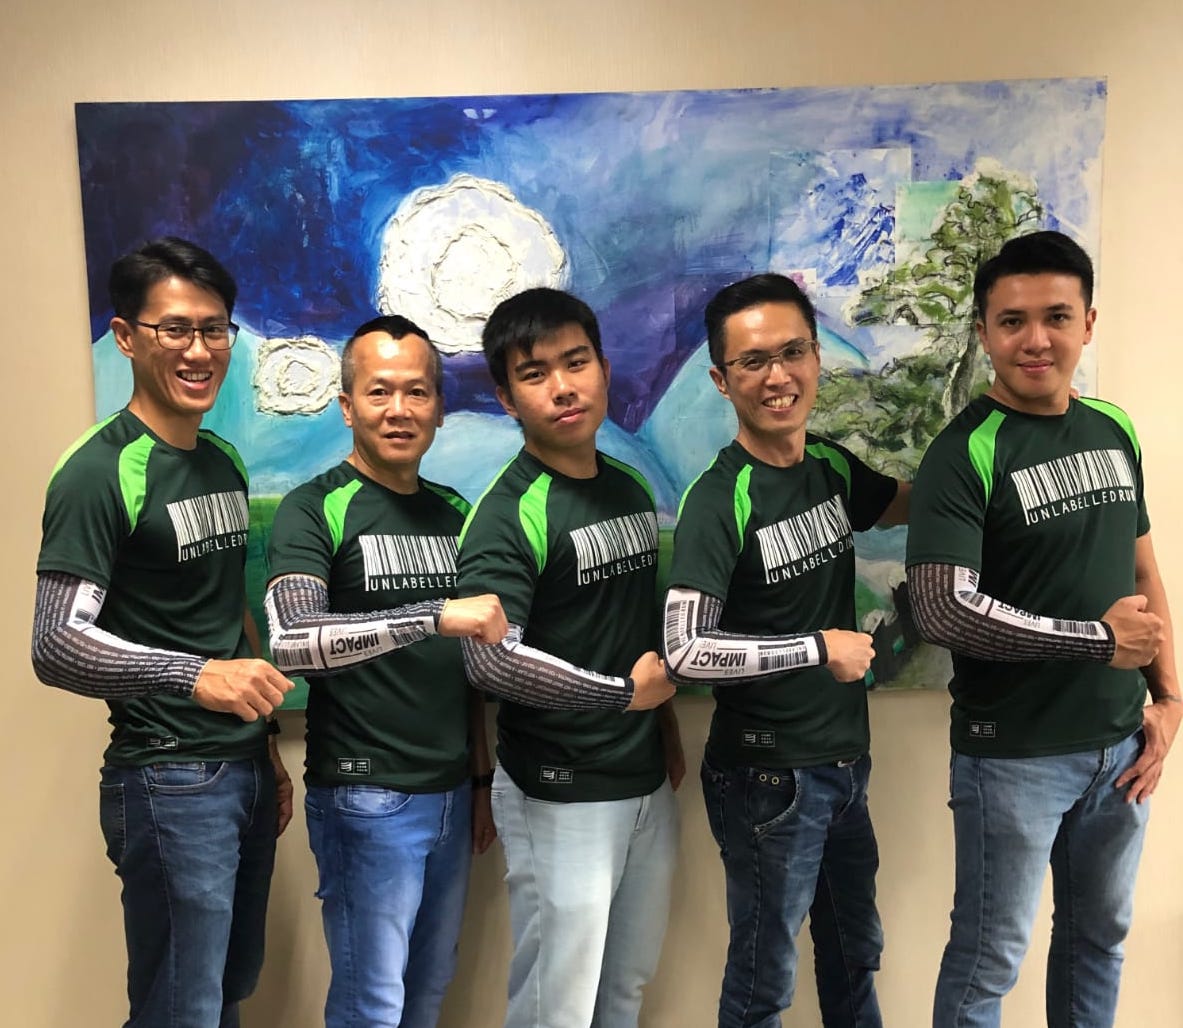 From left to right: Thomas Chan (Programme staff), Tommy Foo (Property officer), Jayden Chua (Intern), Eddie Ang (HouseMaster) and Nicholas Ong (Social Enterprise staff). Except for Jayden, all of them were once residents at TNCM.